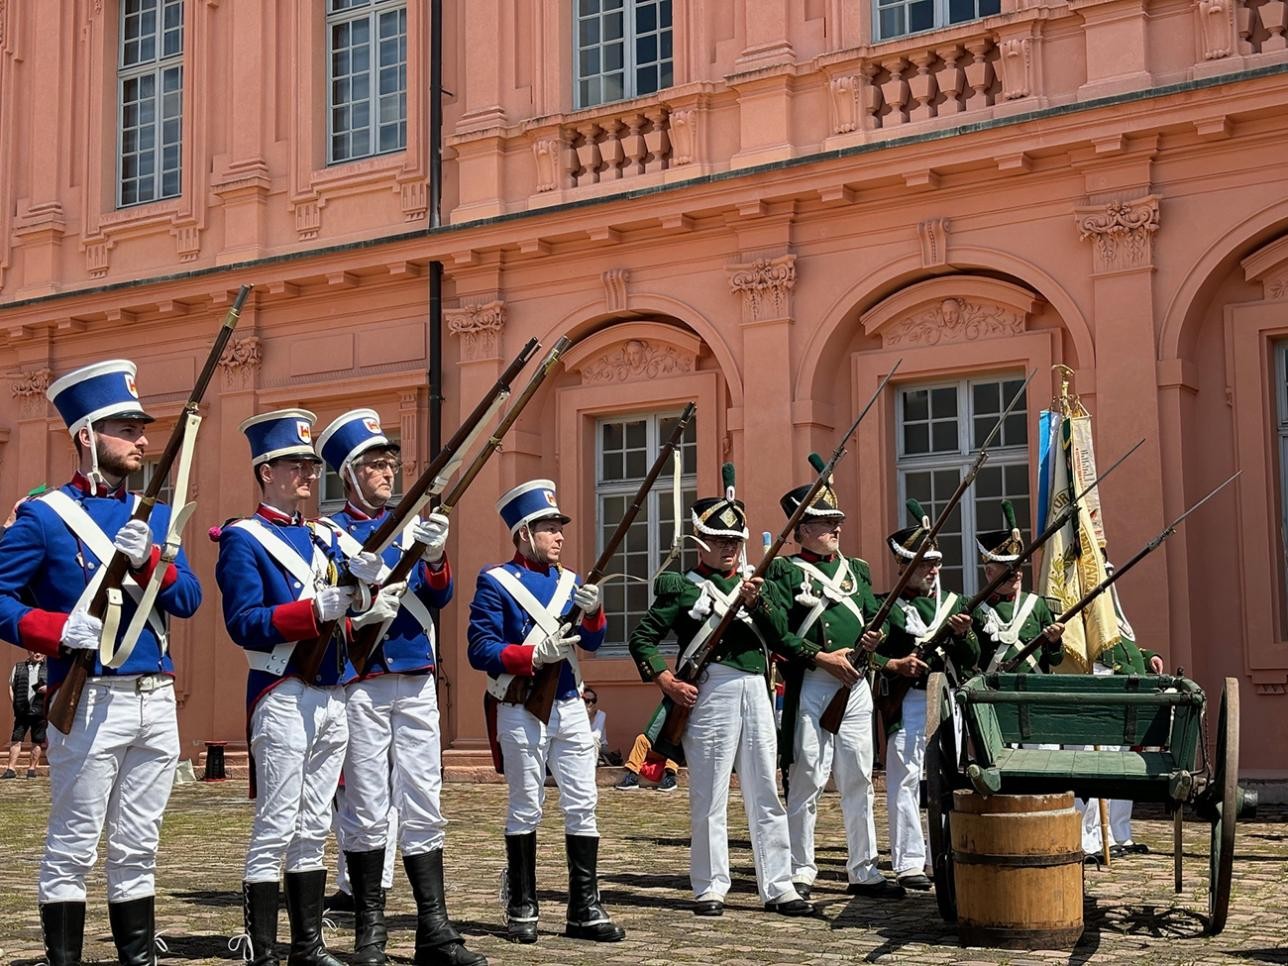 Soldiers hold rifles in front of the castle during the play "Time travel to the Baden Revolution of 1849"